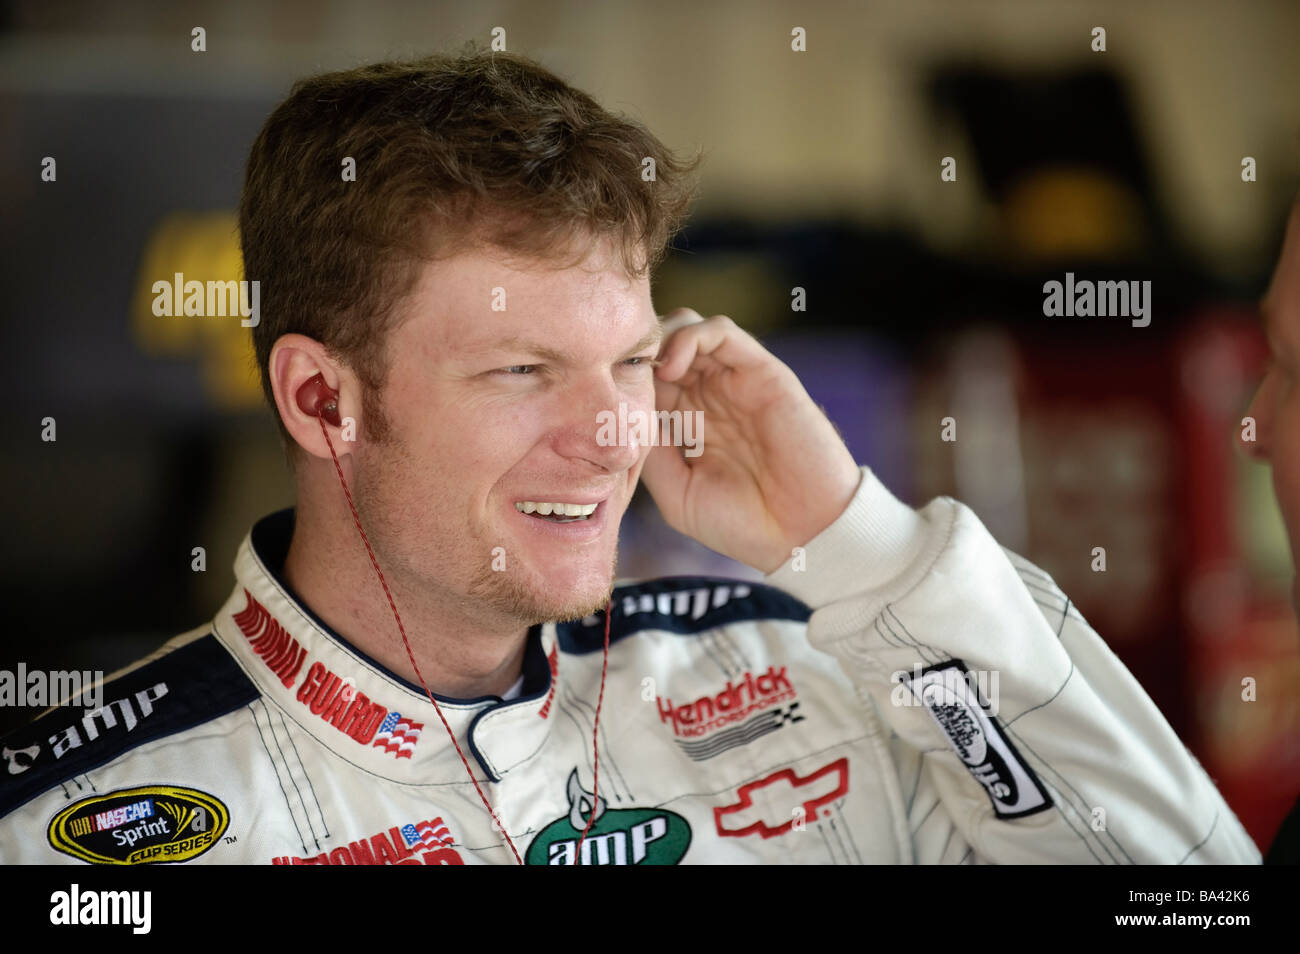 NASCAR driver Dale Earnhardt Jr at the 3M Performance 400 at Michigan International Speedway, 2008 Stock Photo